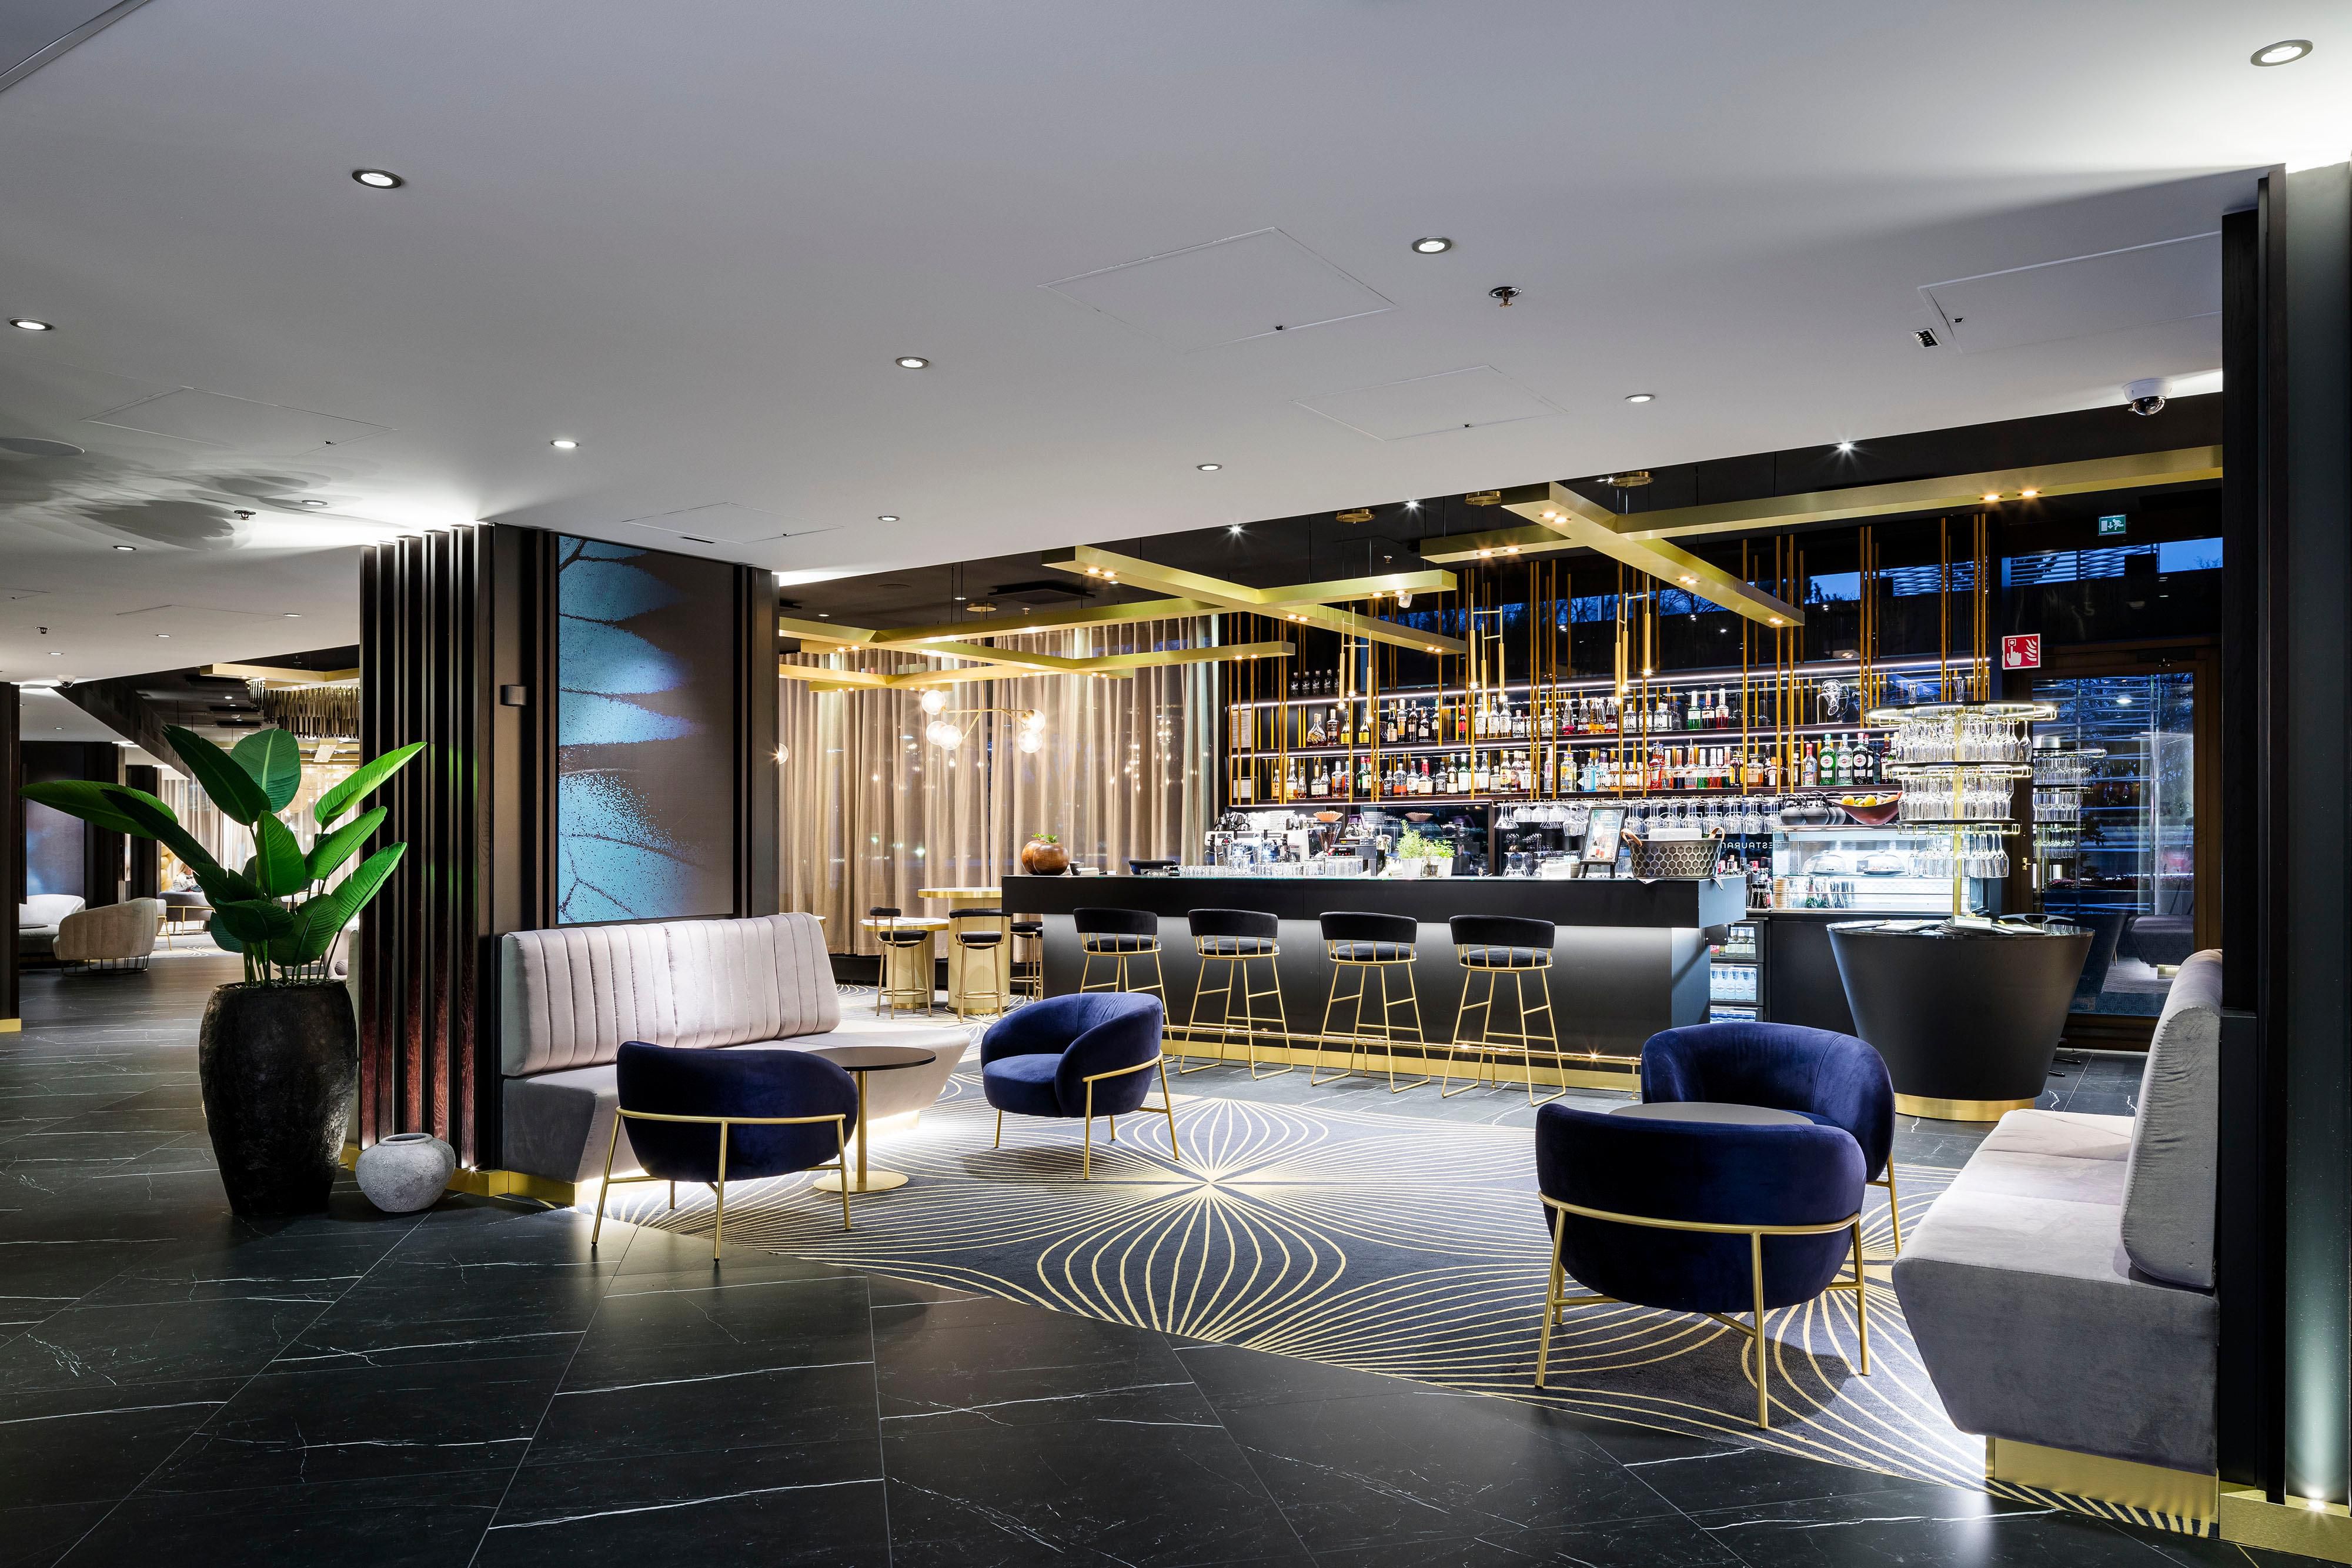 Relax at our new Lobby Bar and enjoy refreshments of your liking